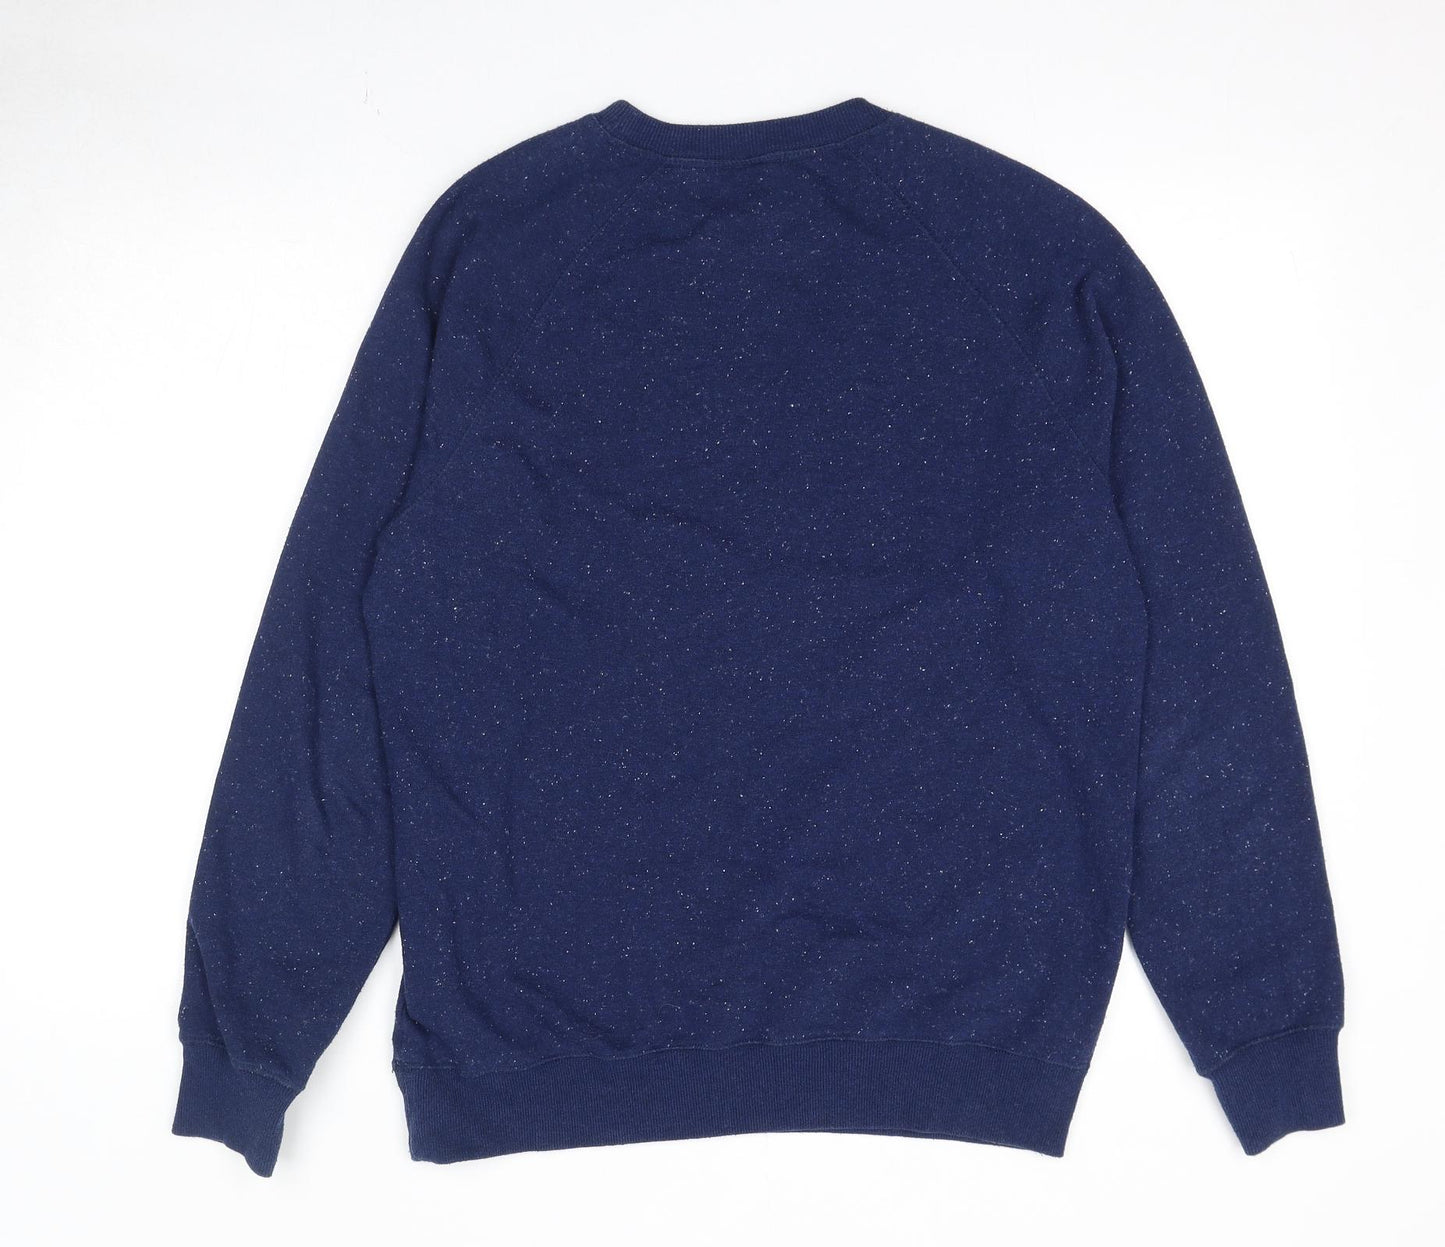 Divided by H&M Mens Blue Cotton Pullover Sweatshirt Size M